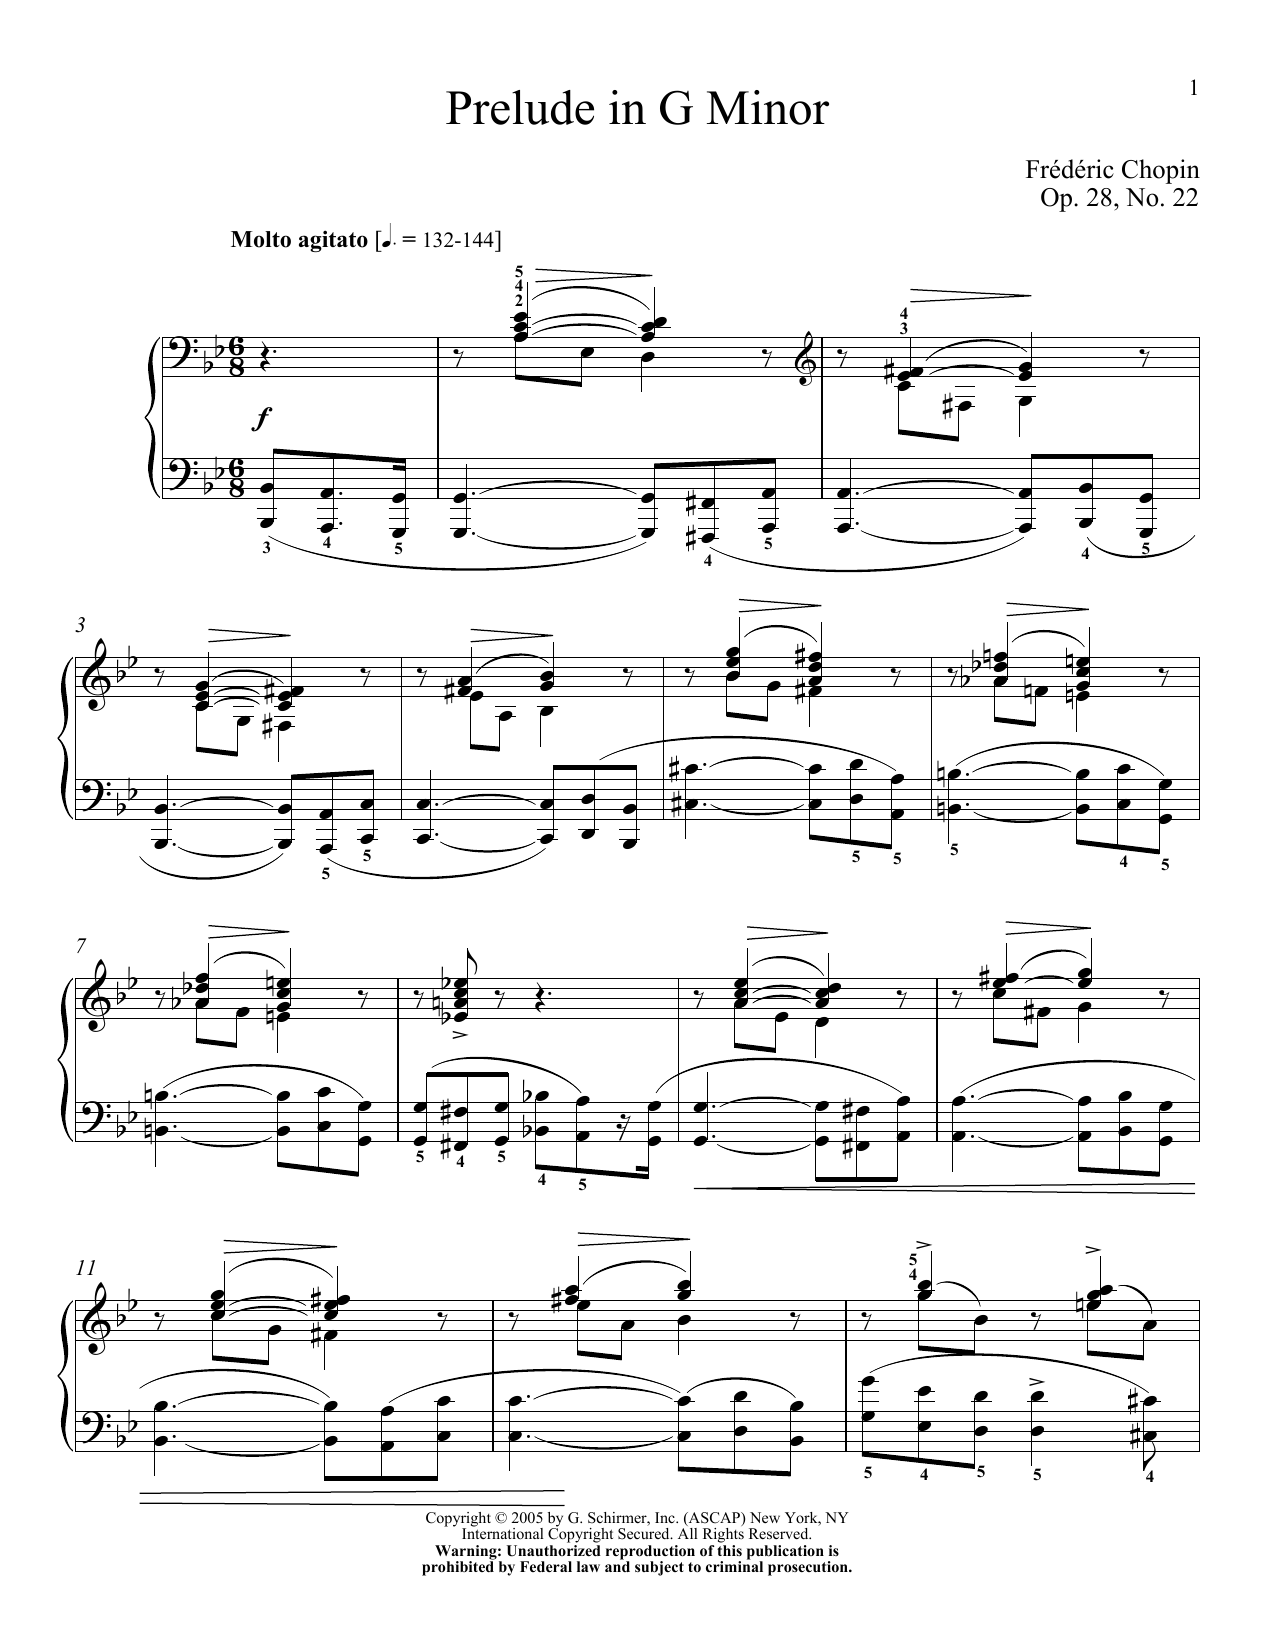 Download Frederic Chopin Prelude, Op. 28, No. 22 Sheet Music